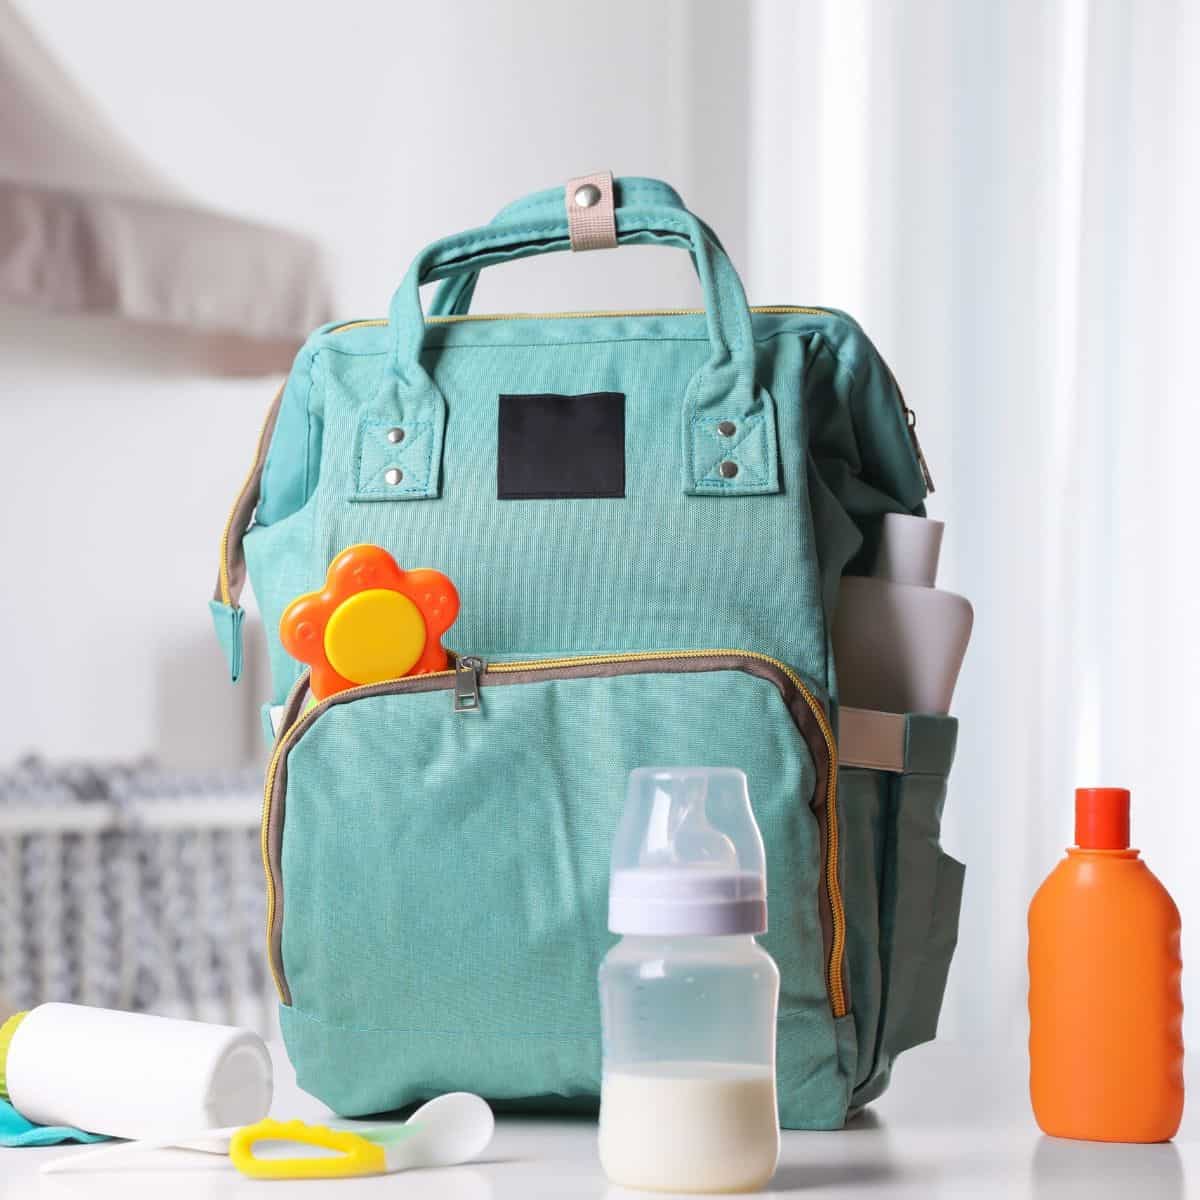 diaper bag backpack surrounded by the essentials